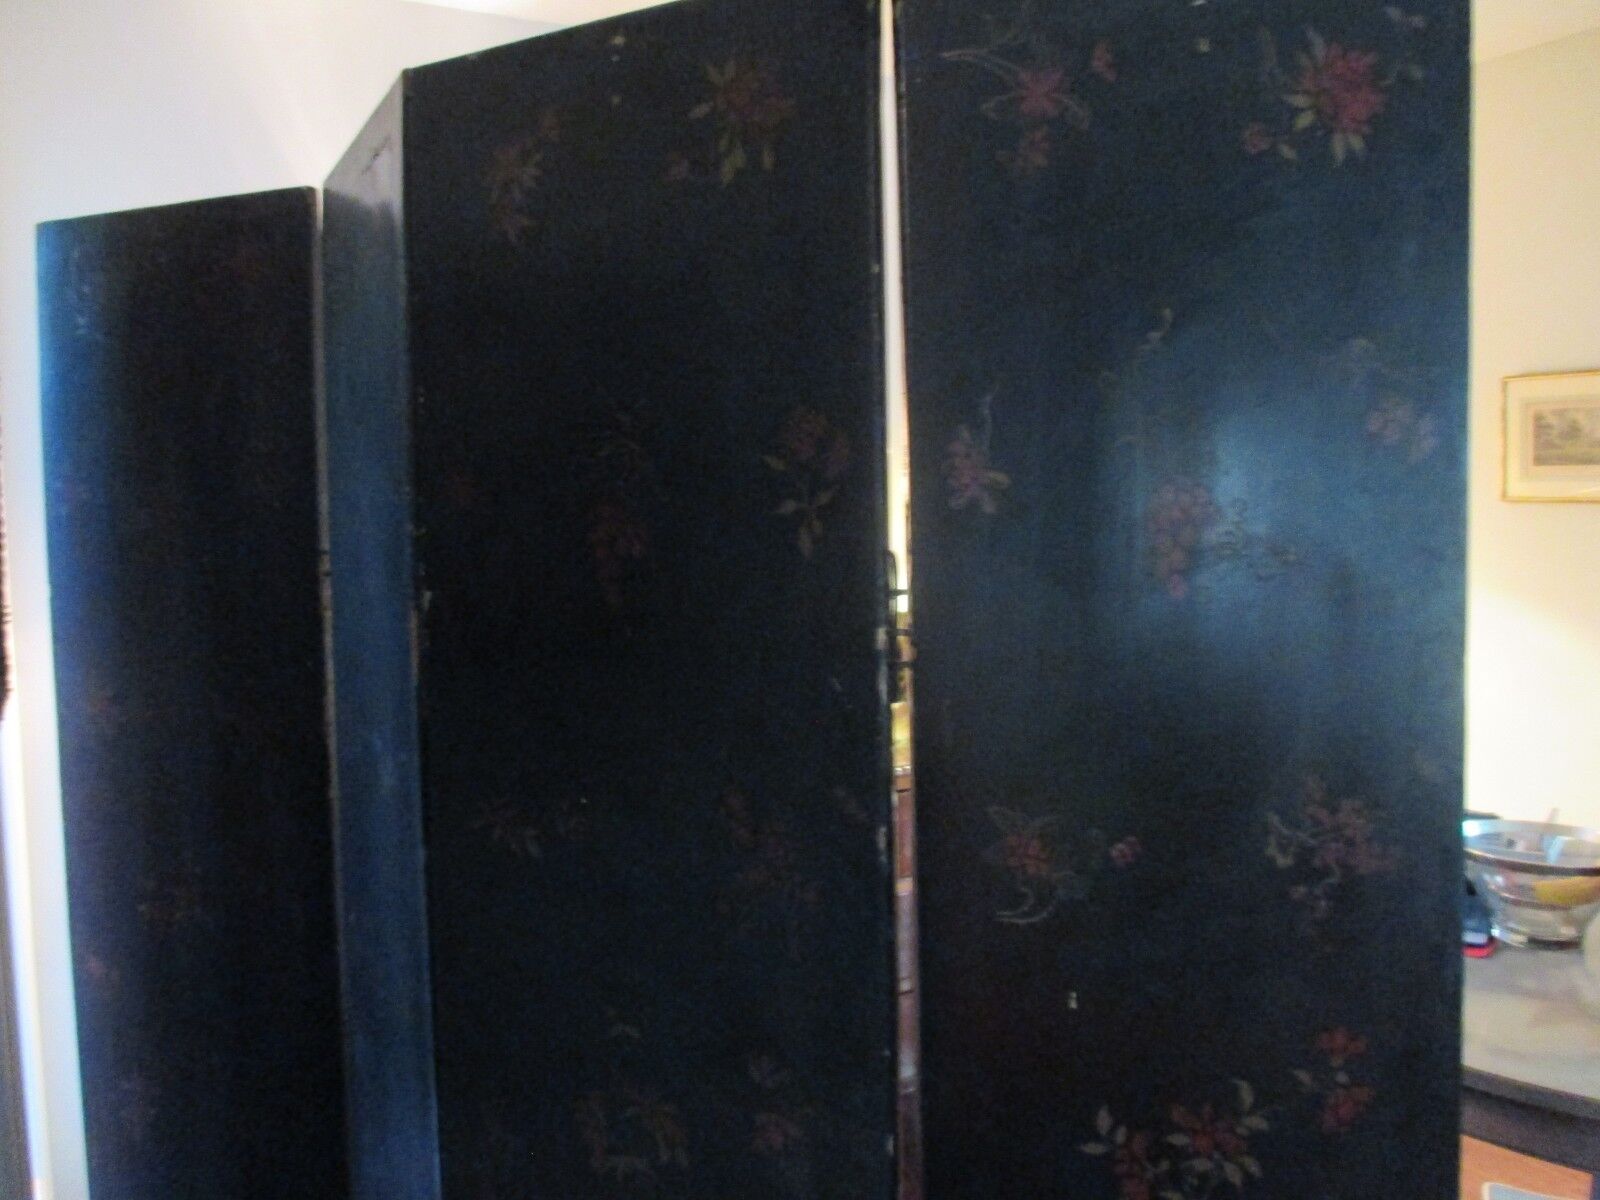 ANTIQUE CHINESE BLACK LACQUER SCREEN Mother of Pearl-EXQUISITE! RARE19th C. Без бренда - фотография #7